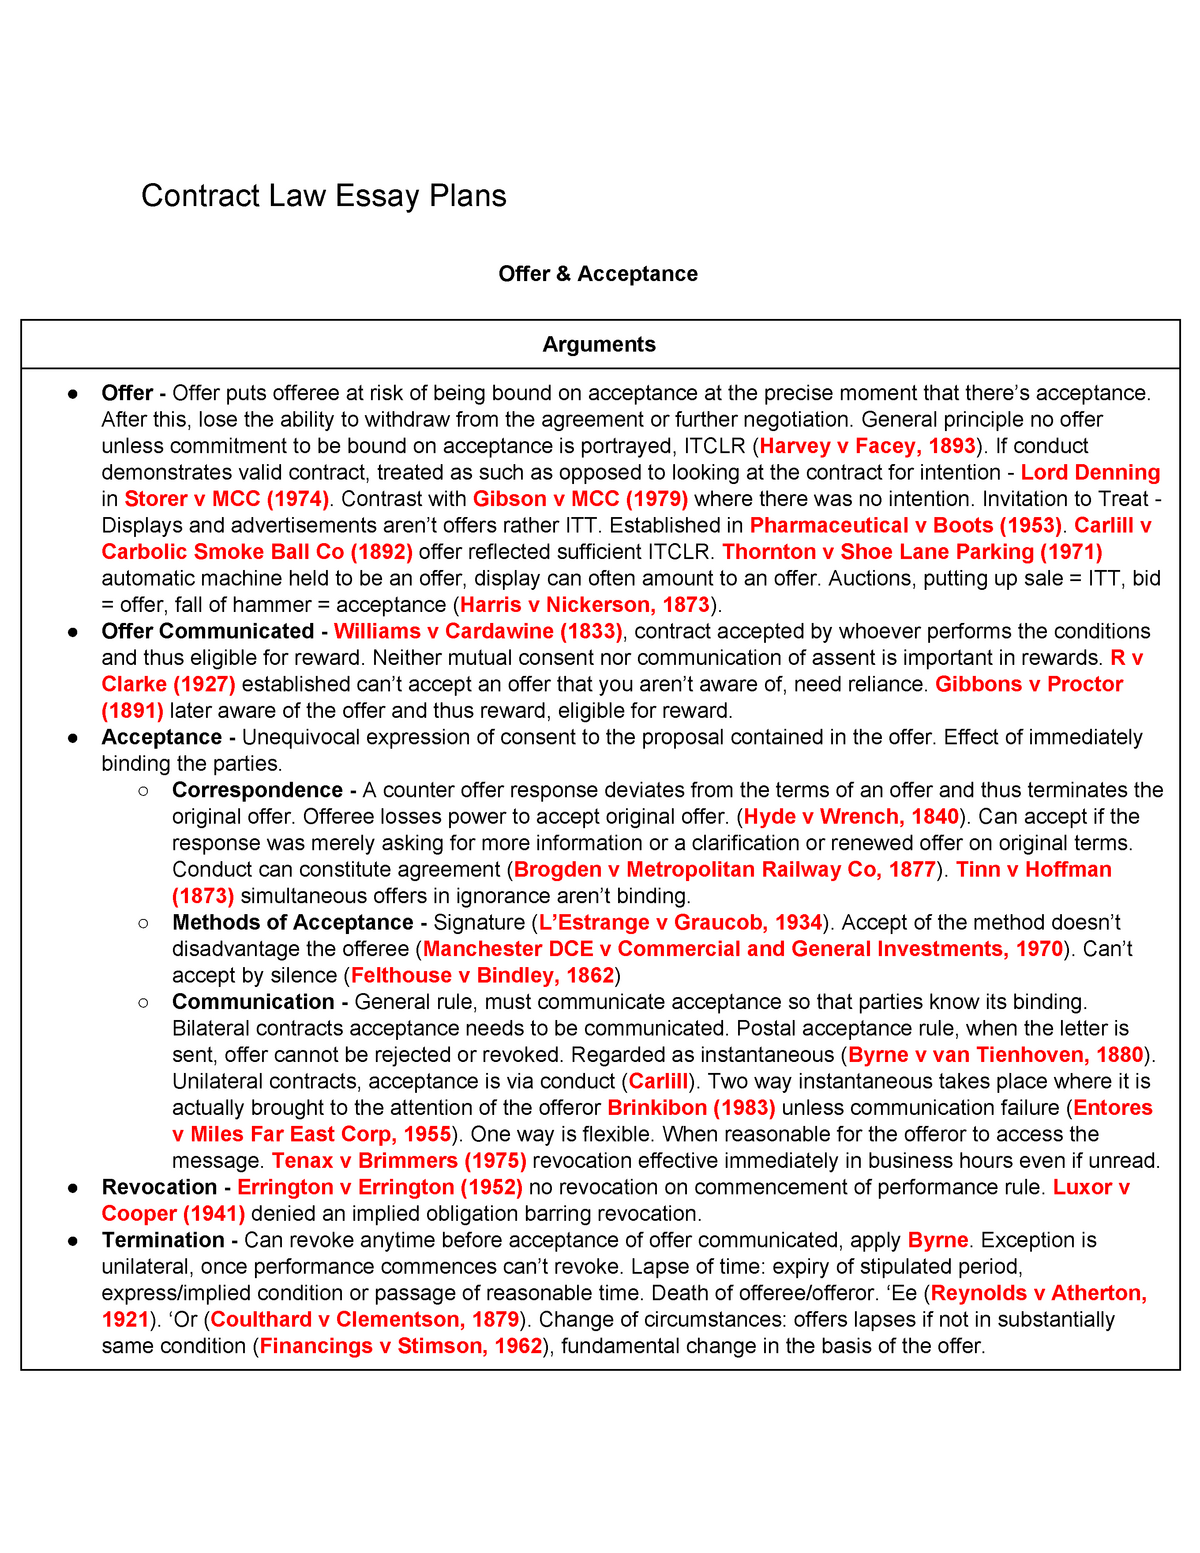 essay contract law